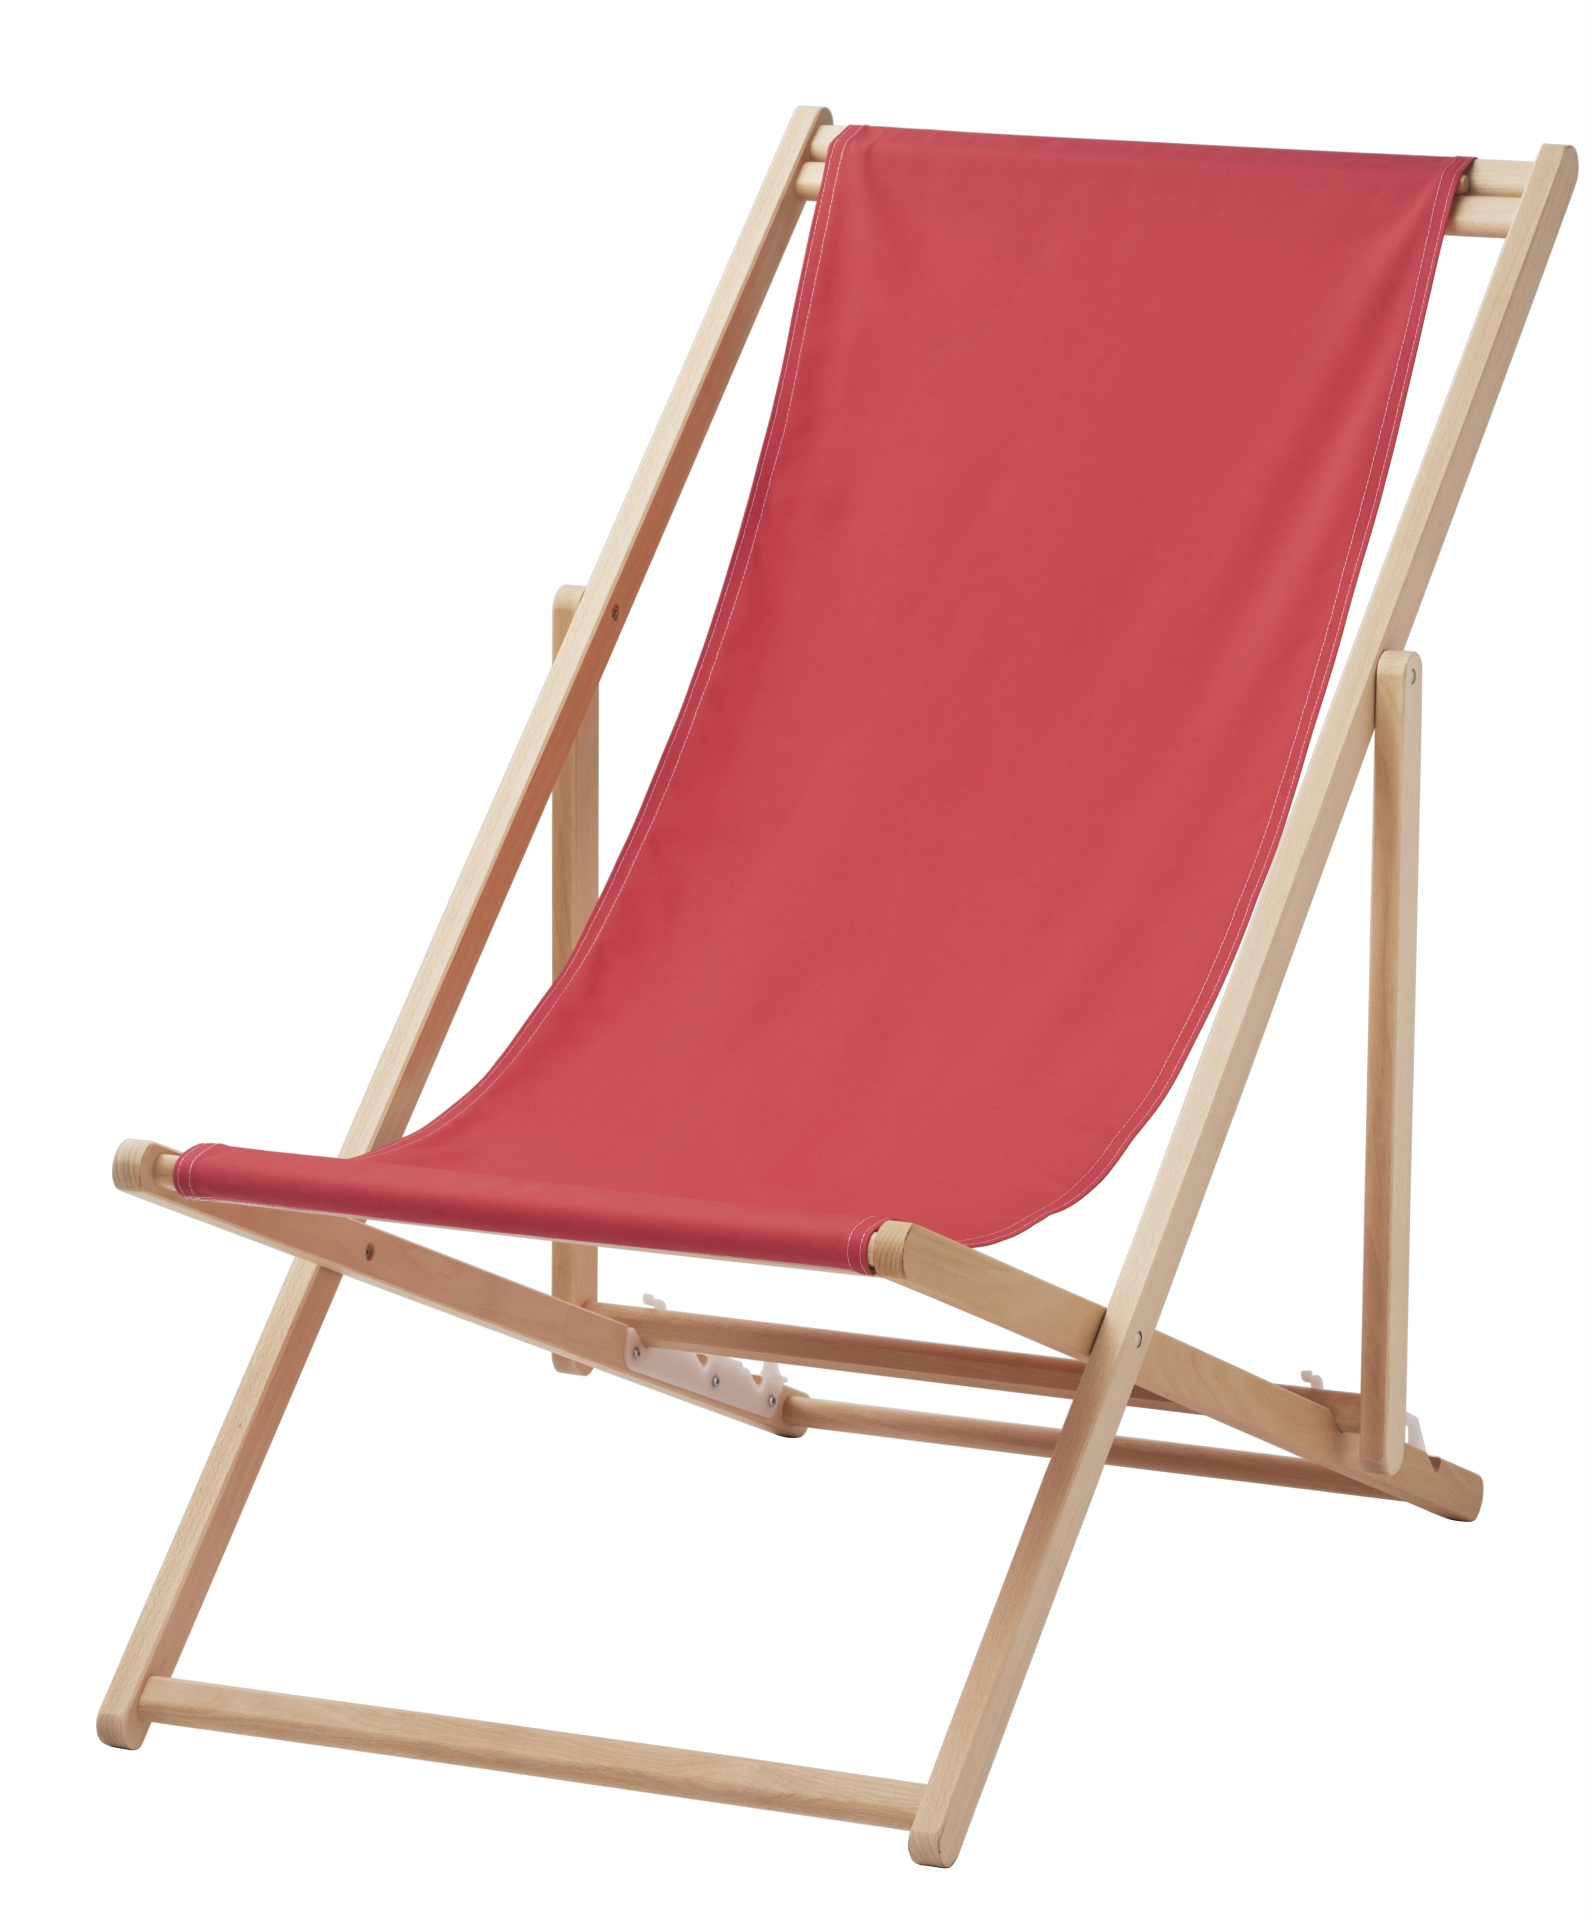 IKEA Recalls Beach Chairs Due to Fall and Fingertip Amputation ...